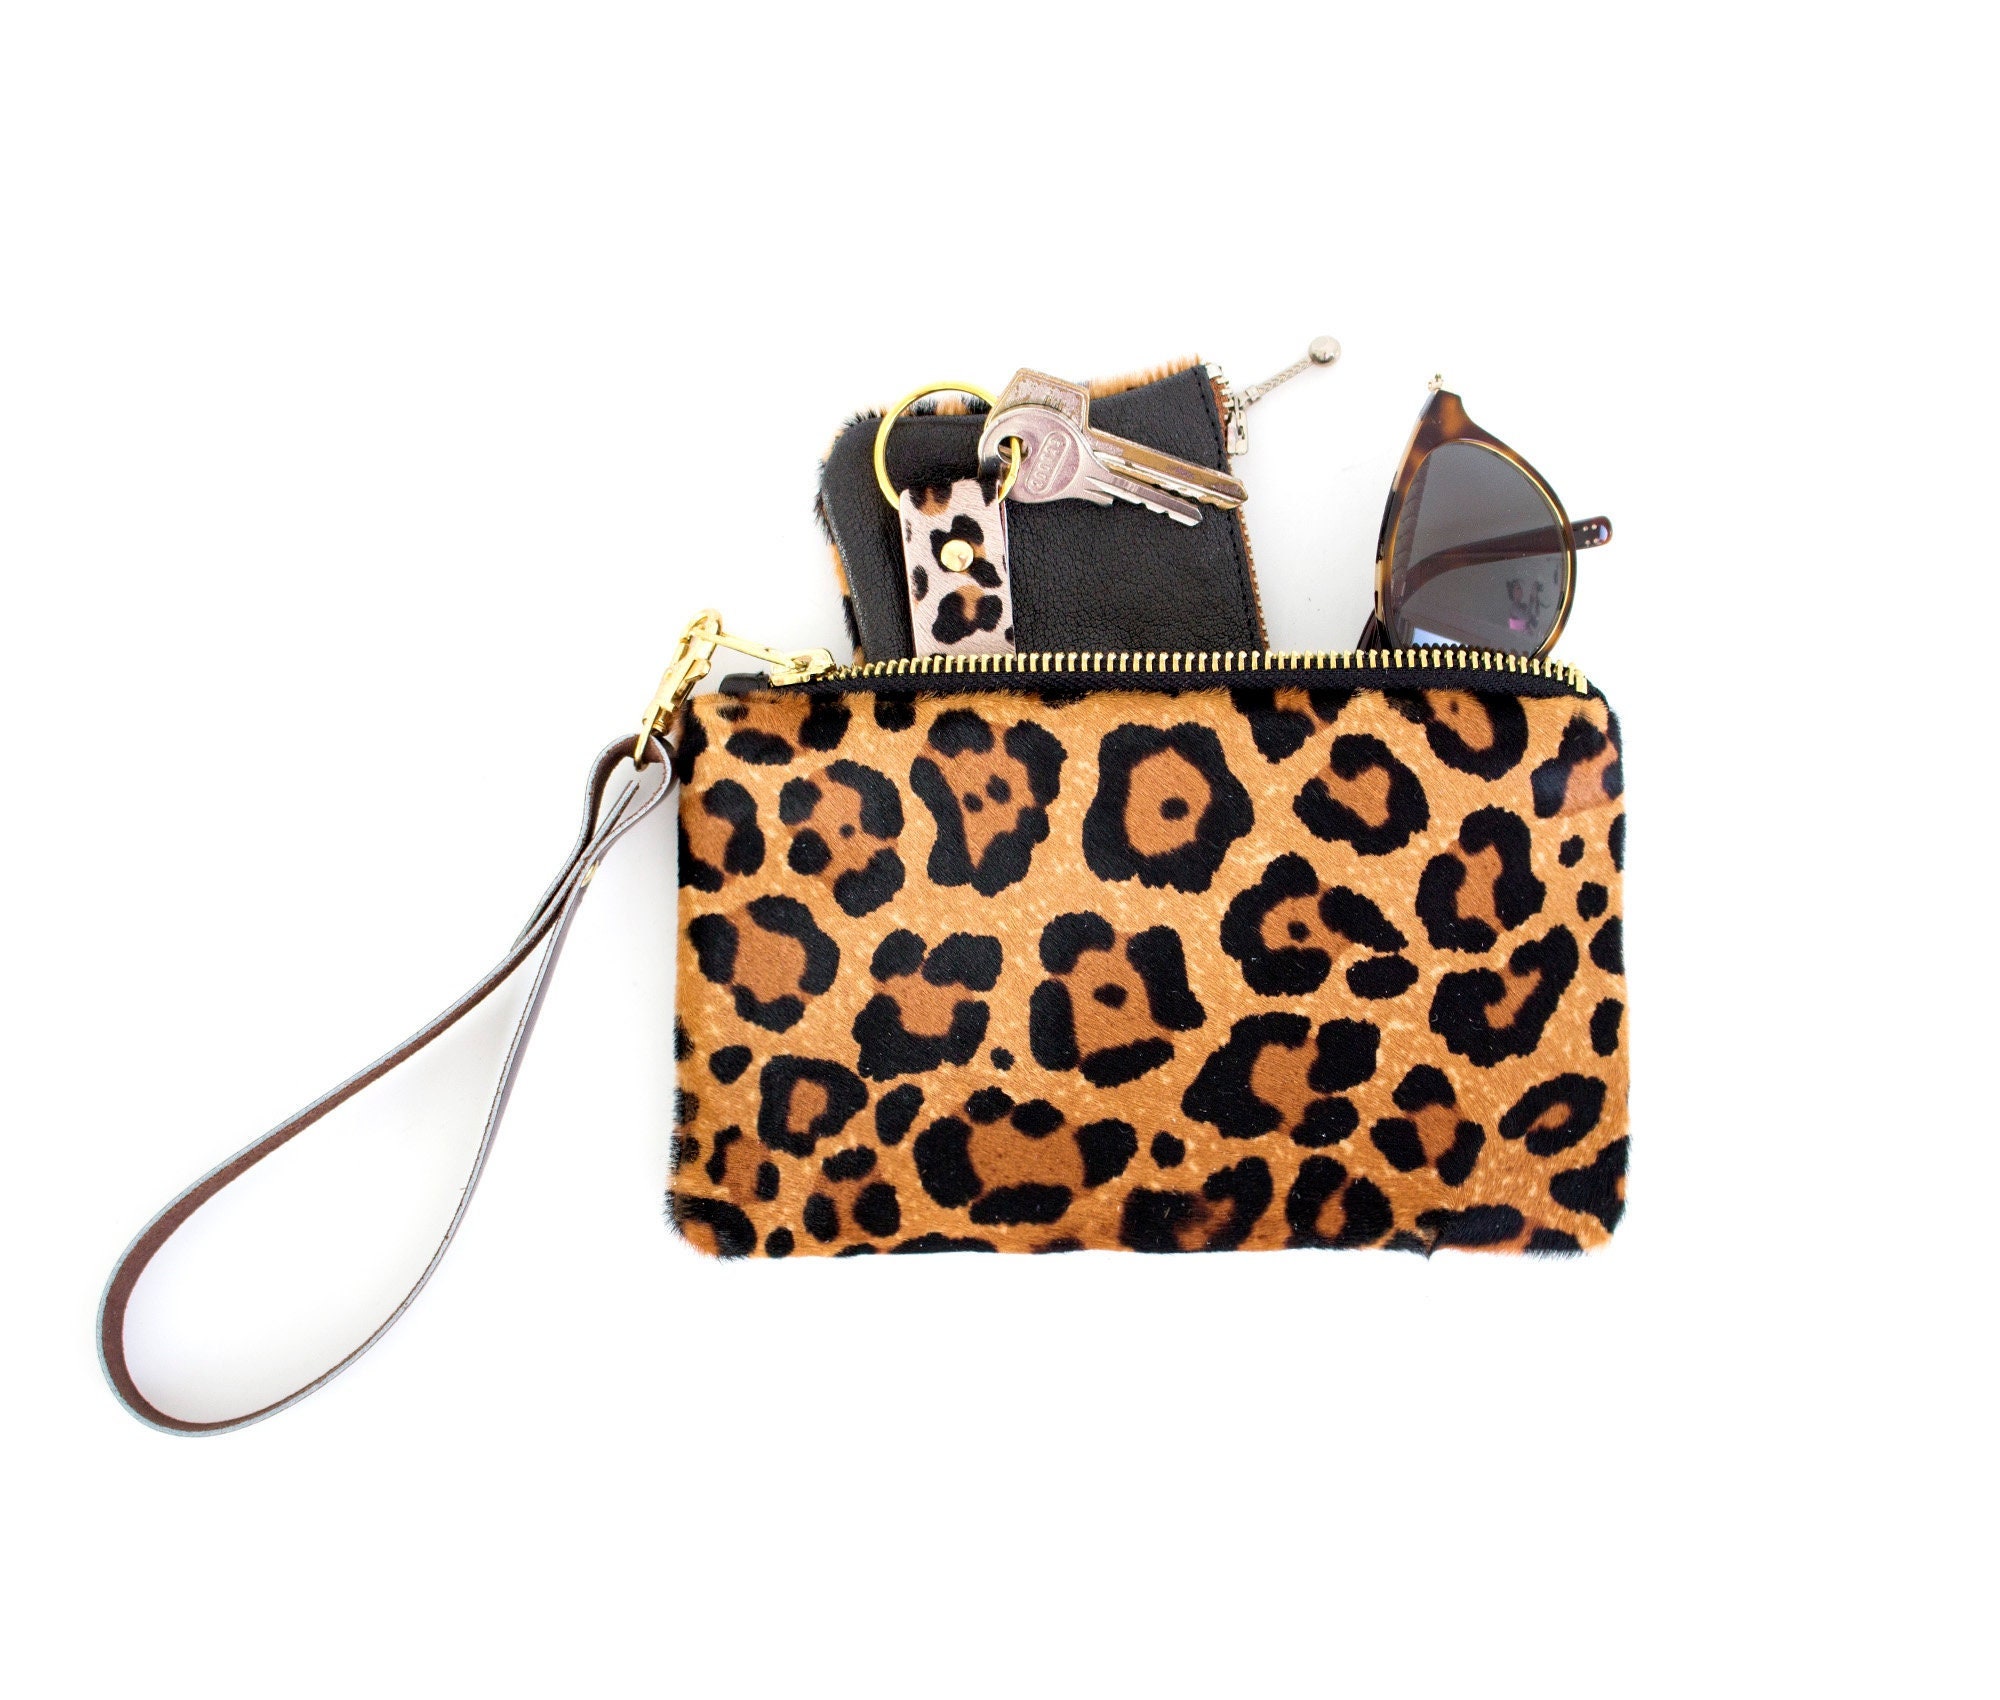 Clare V - Authenticated Clutch Bag - Cloth Camel Leopard for Women, Very Good Condition